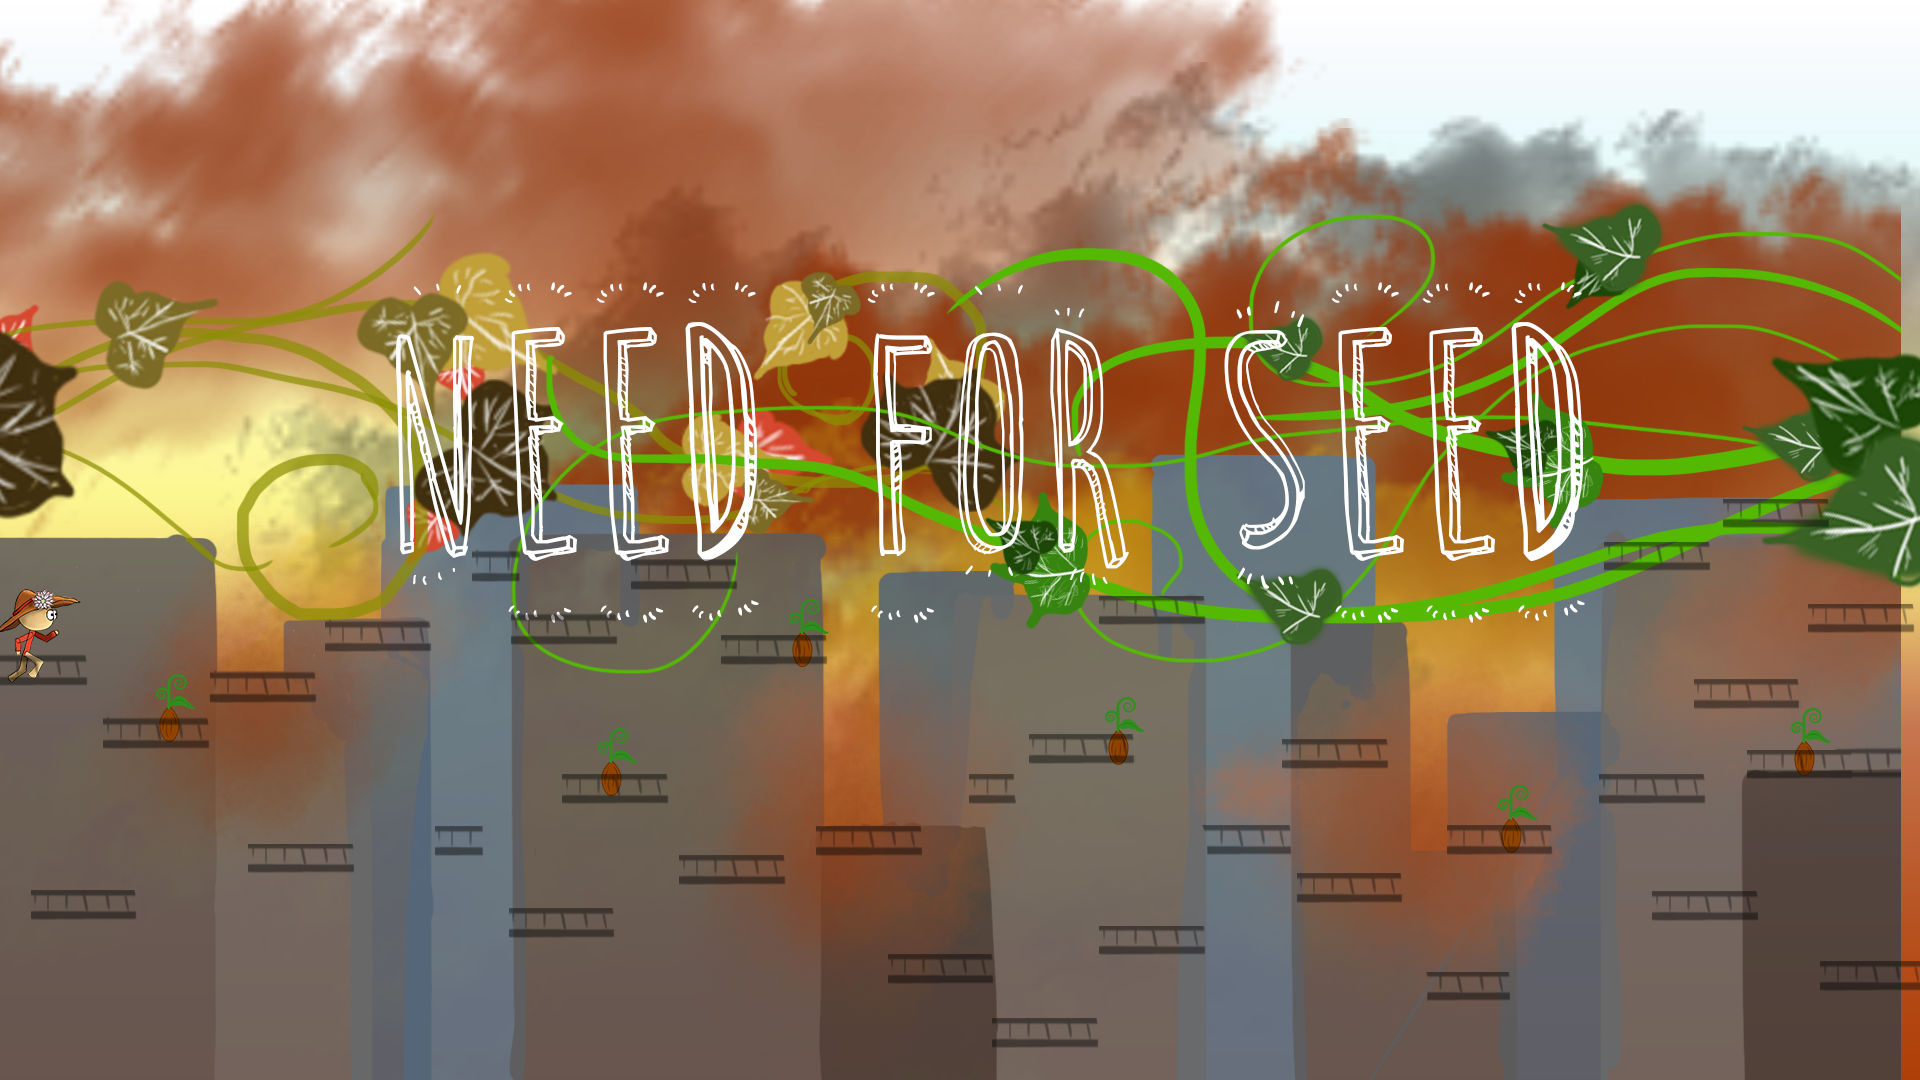 Need for Seed